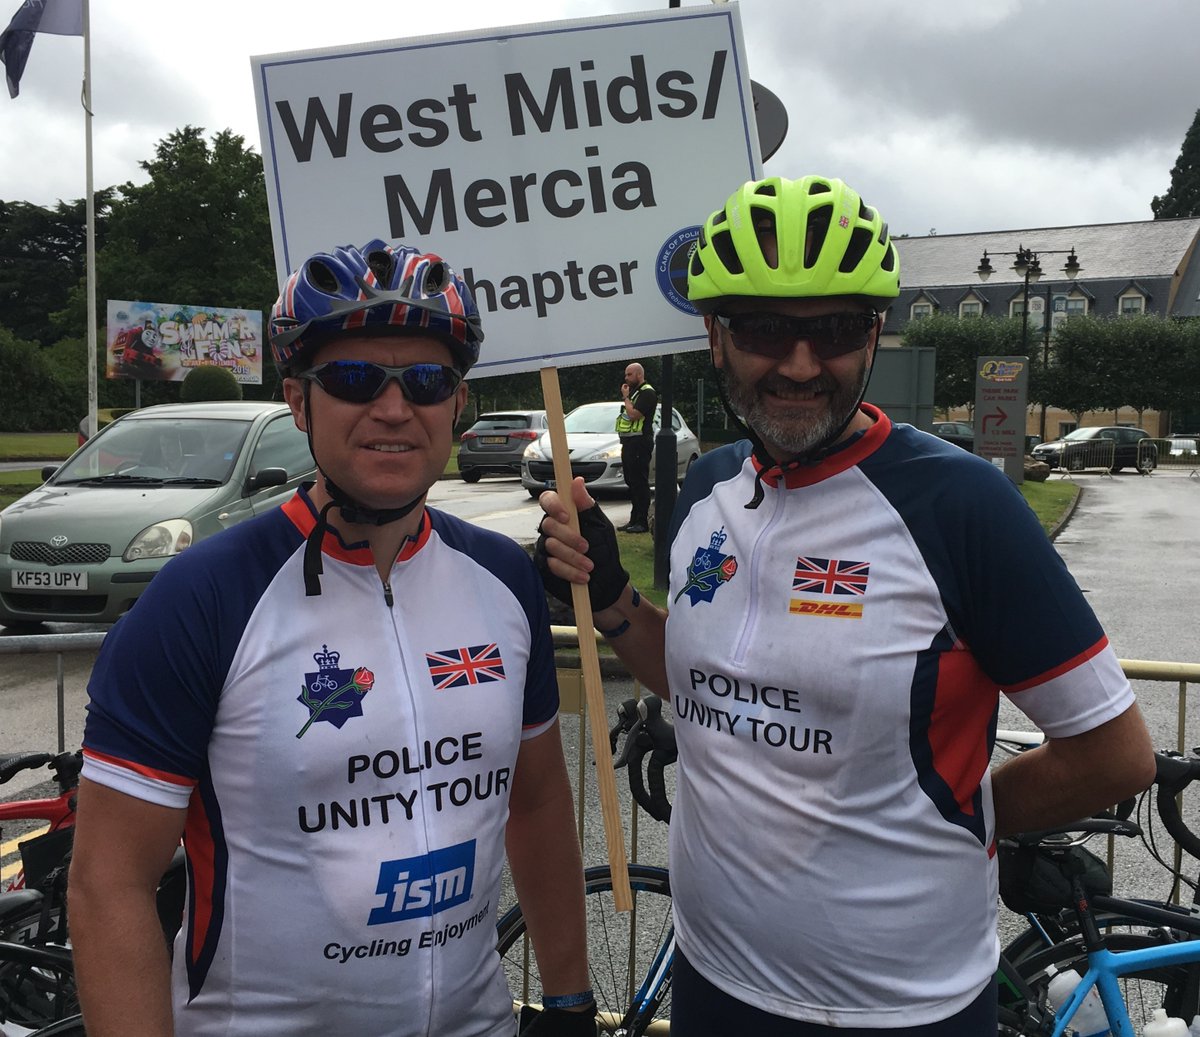 🚴🏽‍♂️POLICE UNITY TOUR 2024: REGISTER TODAY Honouring fallen officers by taking part in the annual Police Unity Tour is an 'unforgettable experience', says branch chair Steve Butler. This year's event is taking place: 26 - 28 July. Join the team: bit.ly/3Jmh0g7